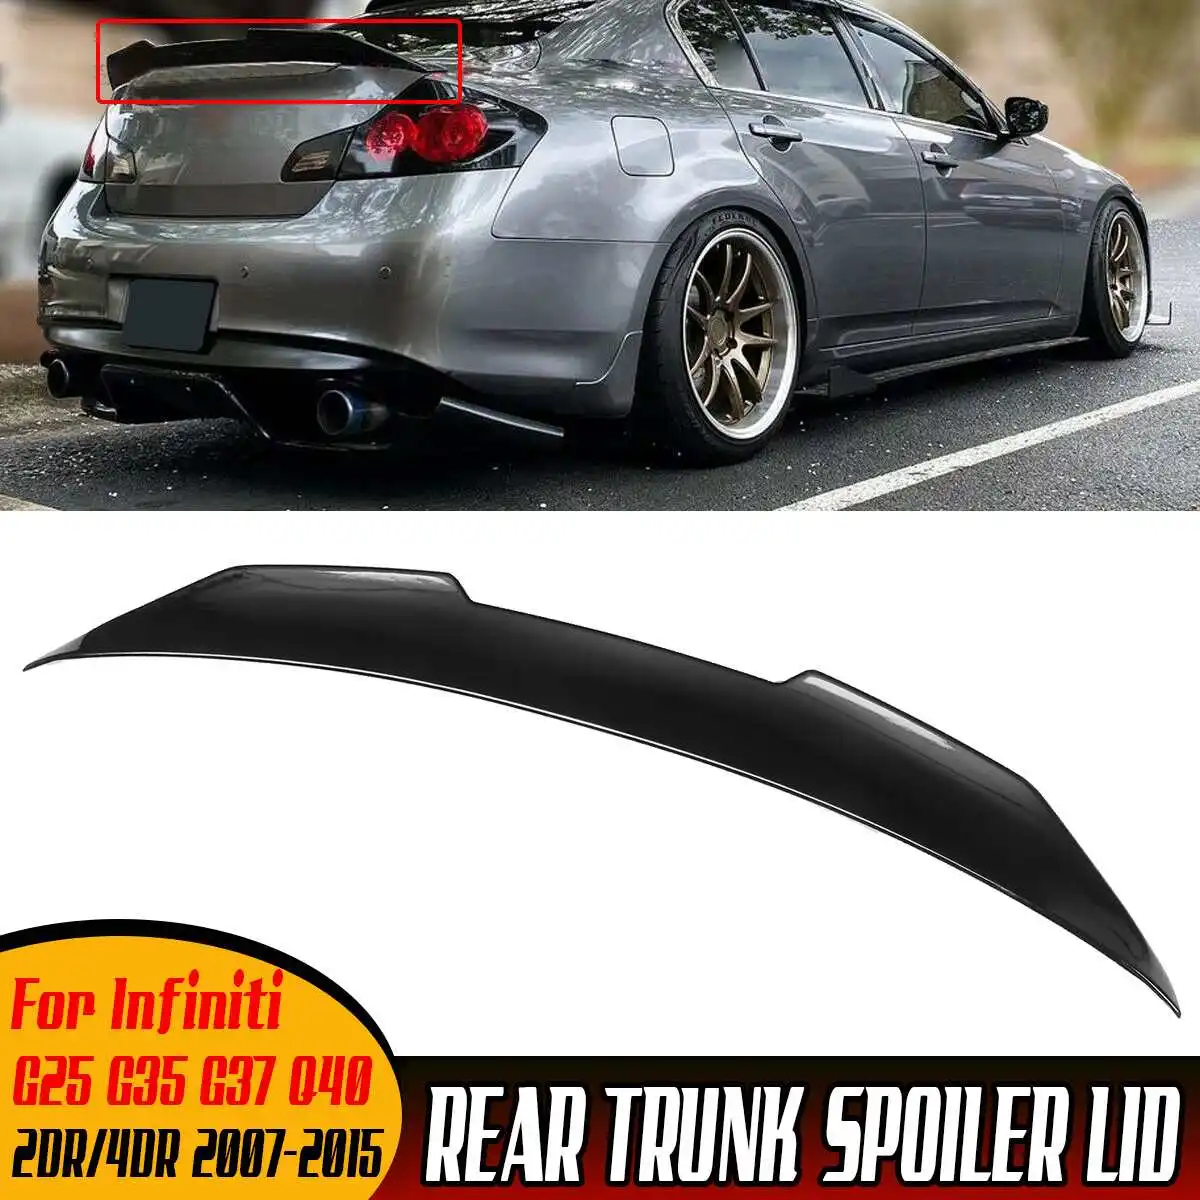 PSM Style Car Rear Trunk Spoiler Wing Lip Boot Wing Lip For Infiniti G25 G35 G37 Q40 2007-2015 2DR/4DR Q40 Rear Wing Spoiler Lip